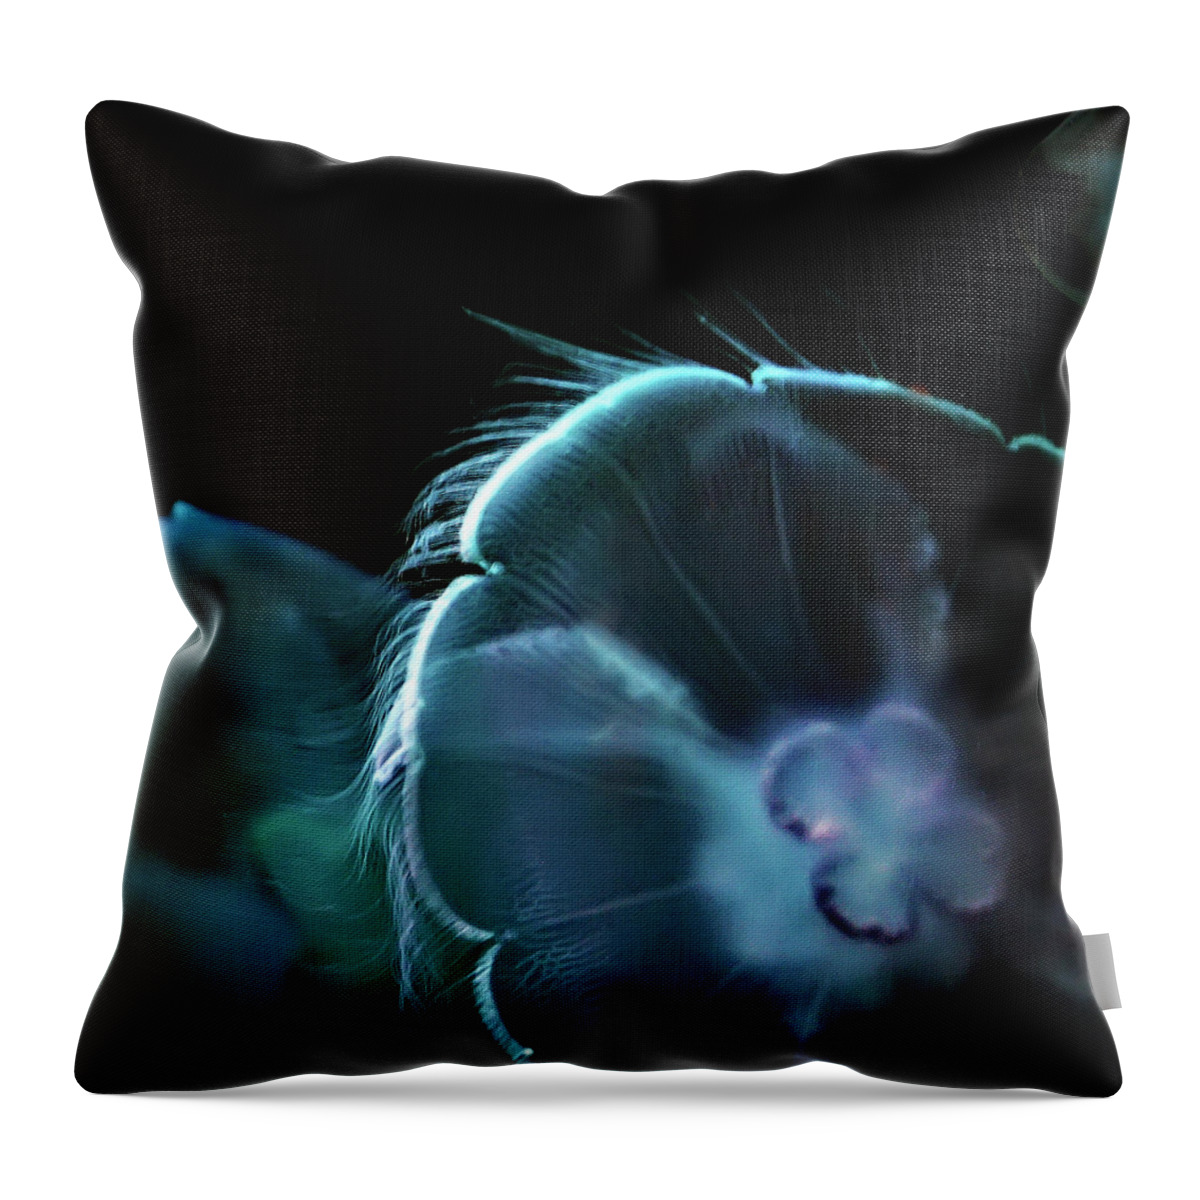 Las Vegas Throw Pillow featuring the photograph Jellies in Blue Light by Art Block Collections